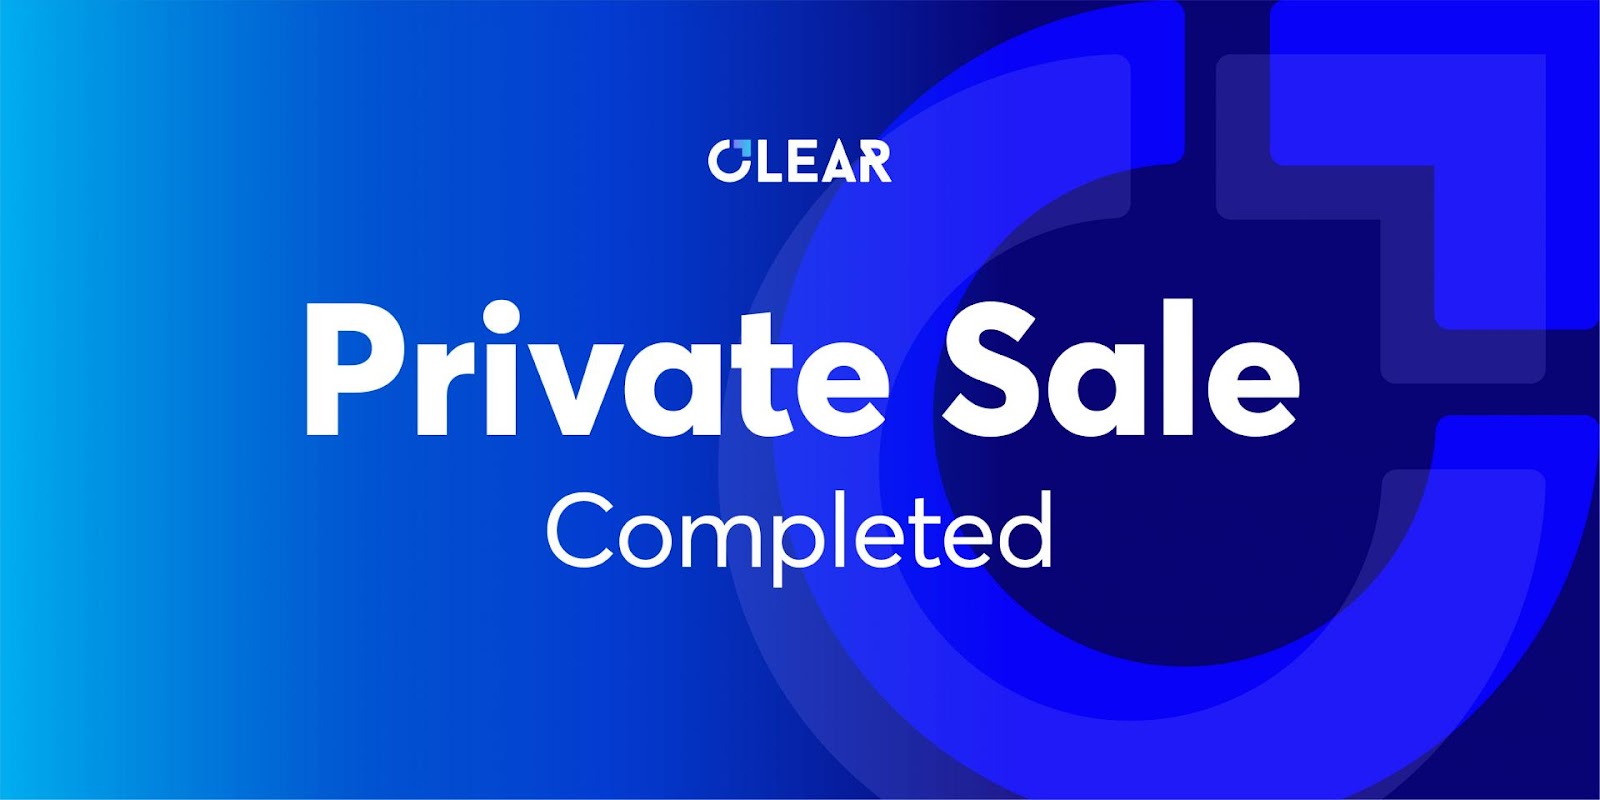 Clear Protocol Completes $2.5 Million Private Sale Round to Build DeFi Derivative Infrastructure